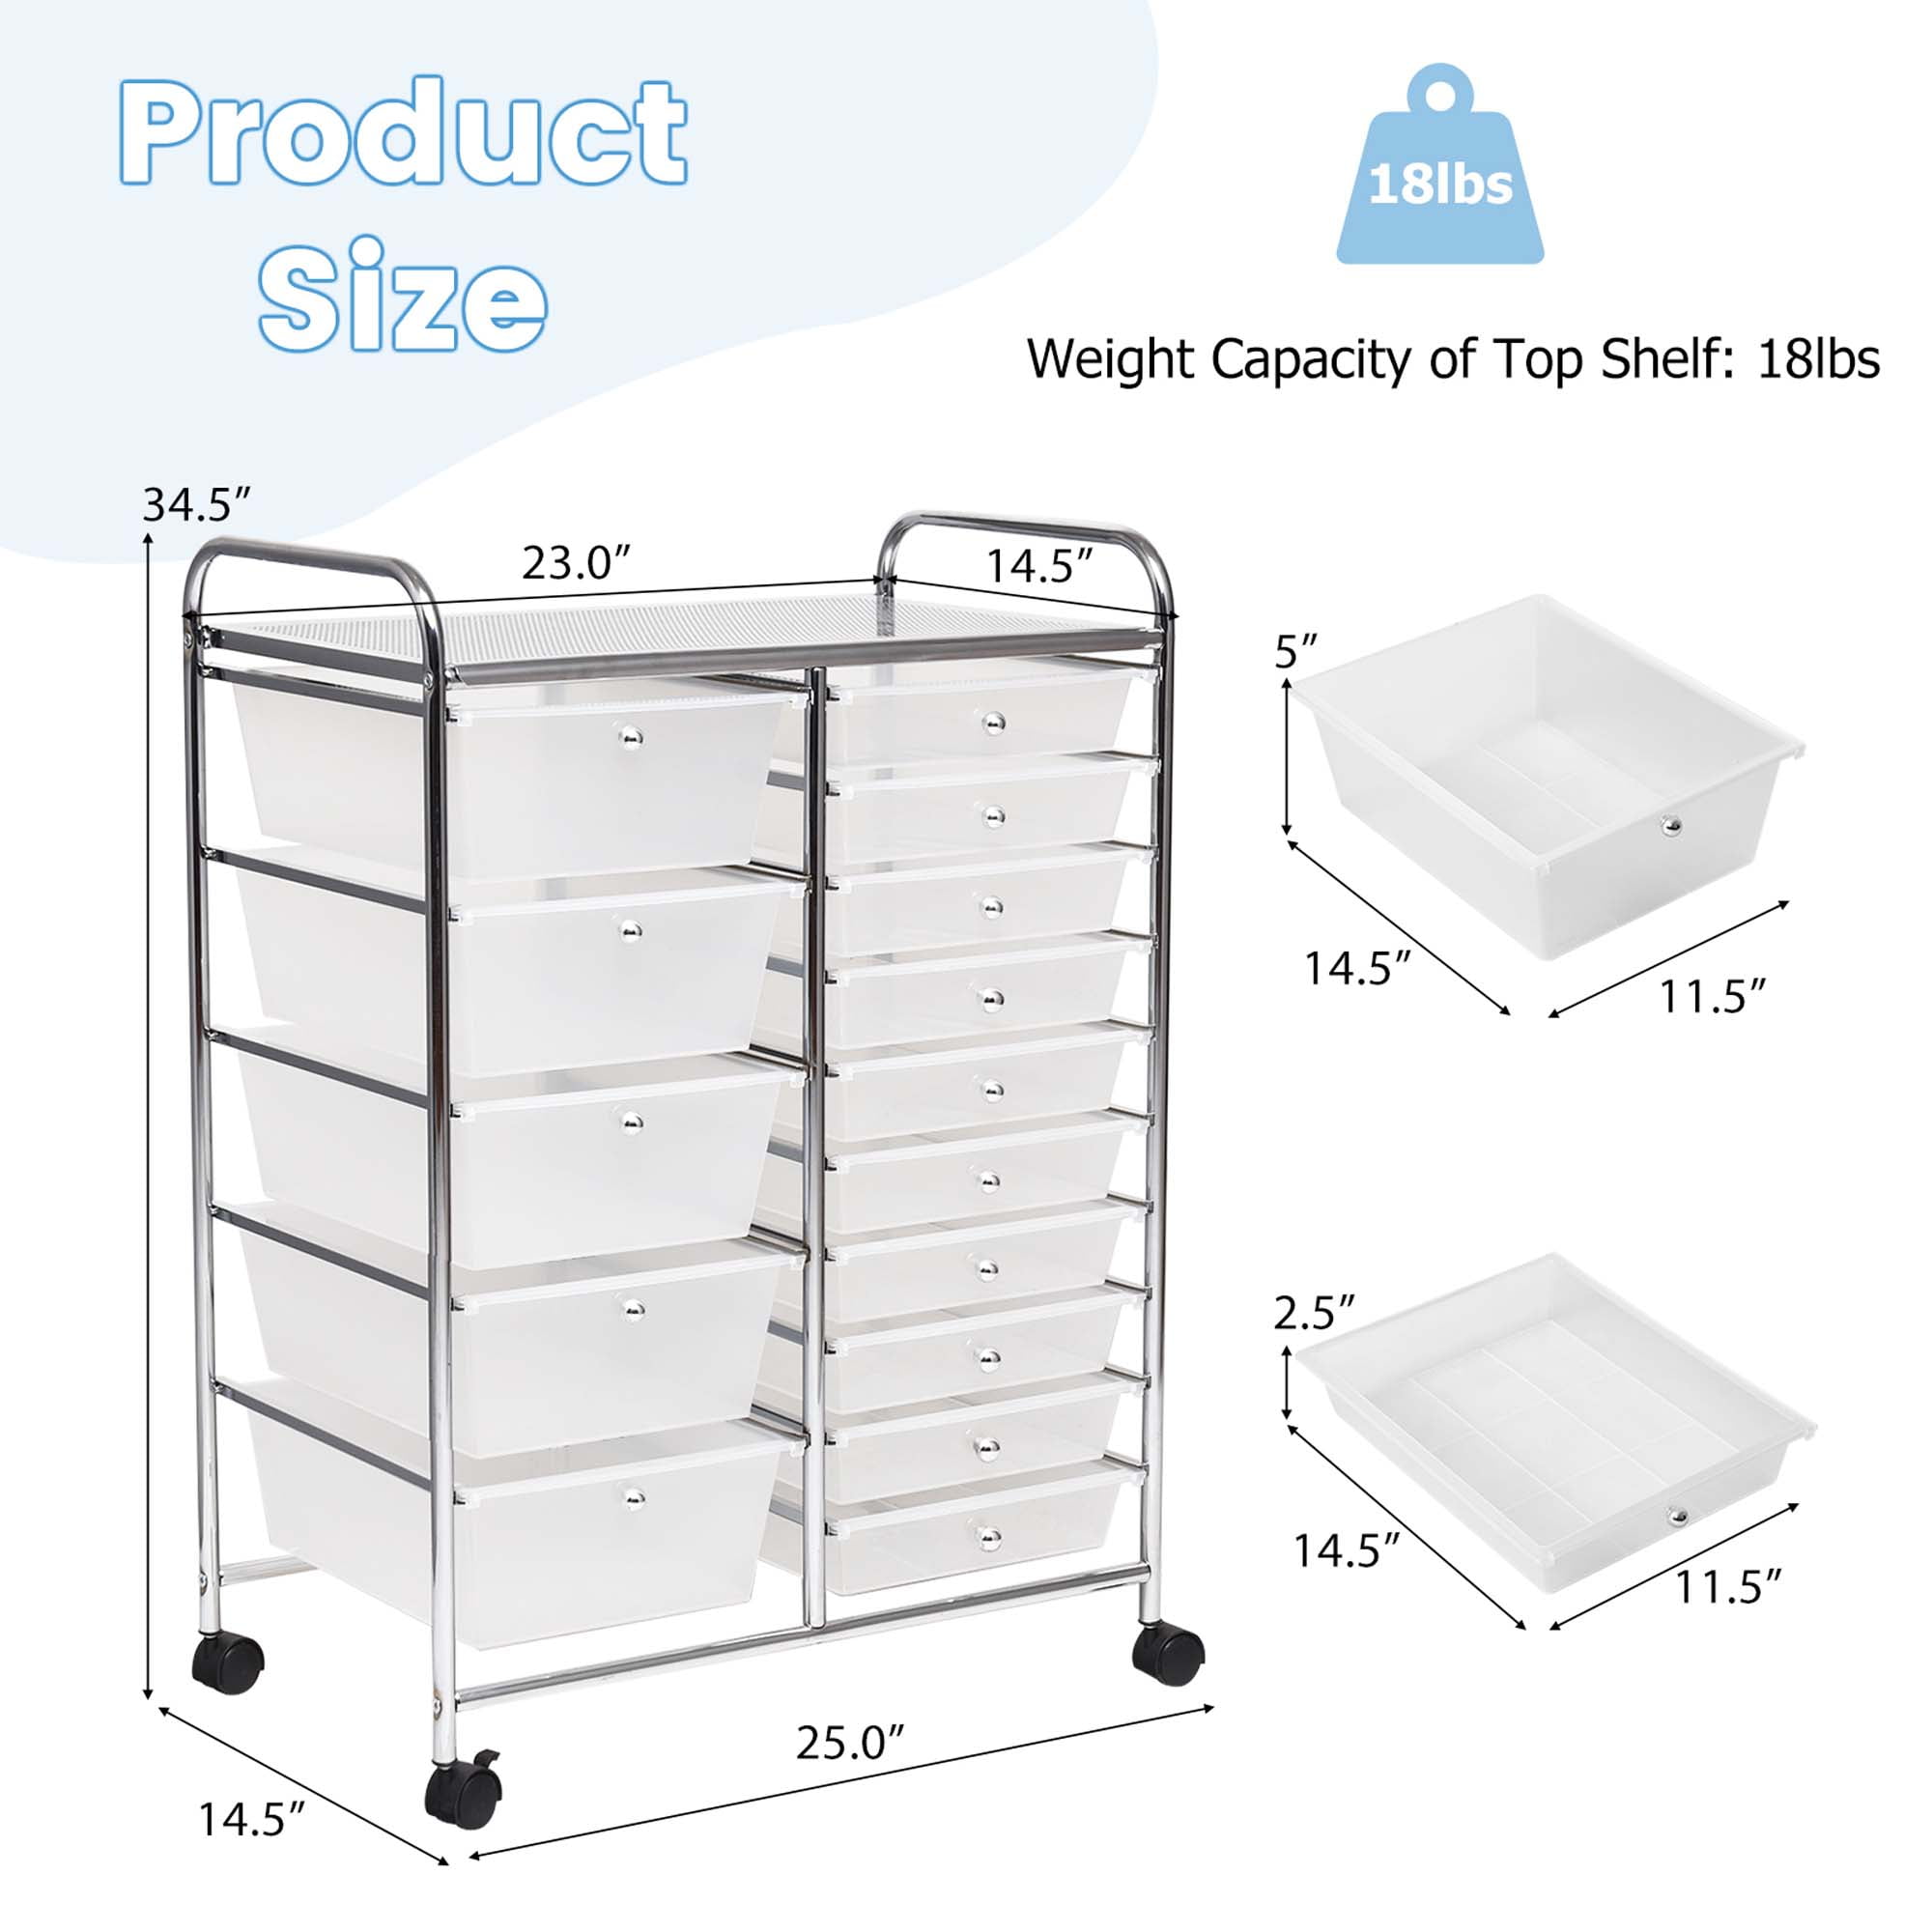 Costway Rolling Storage Cart wIth 15 Drawers - 24.5''x14.5''x34'' - Bed  Bath & Beyond - 30243929